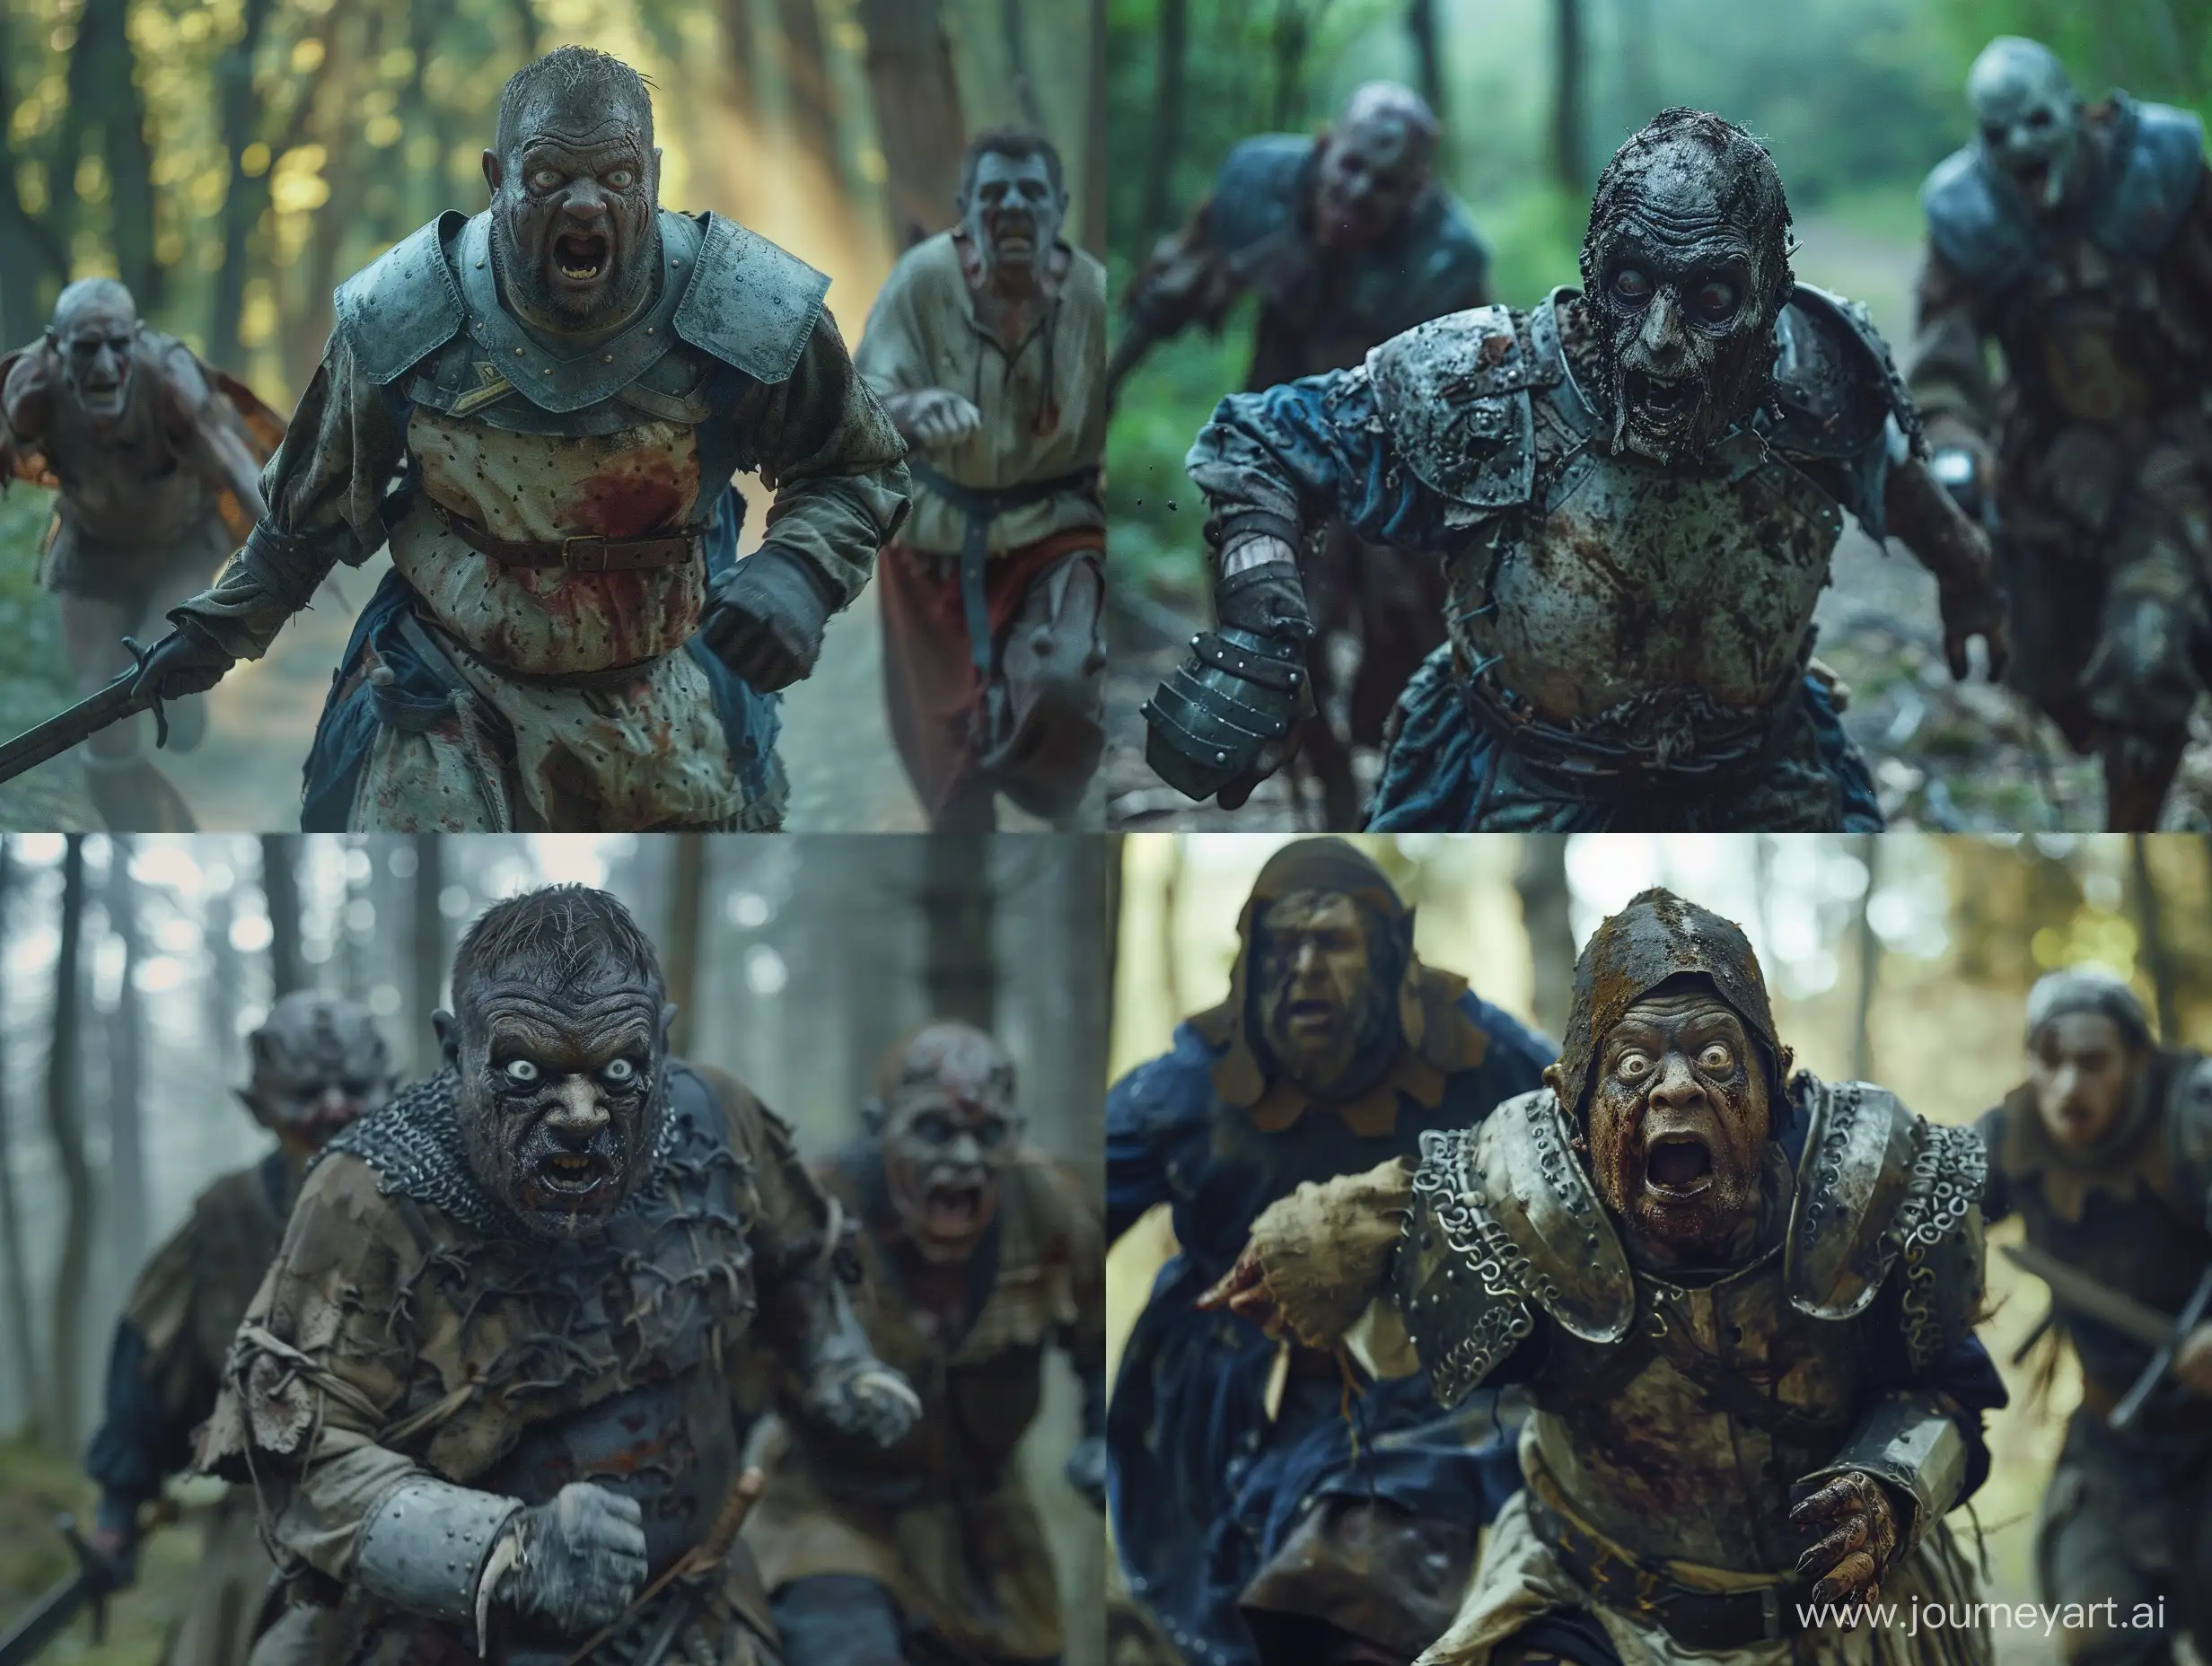 Scared-Medieval-Warrior-Fleeing-Ghouls-in-Cinematic-Forest-Scene